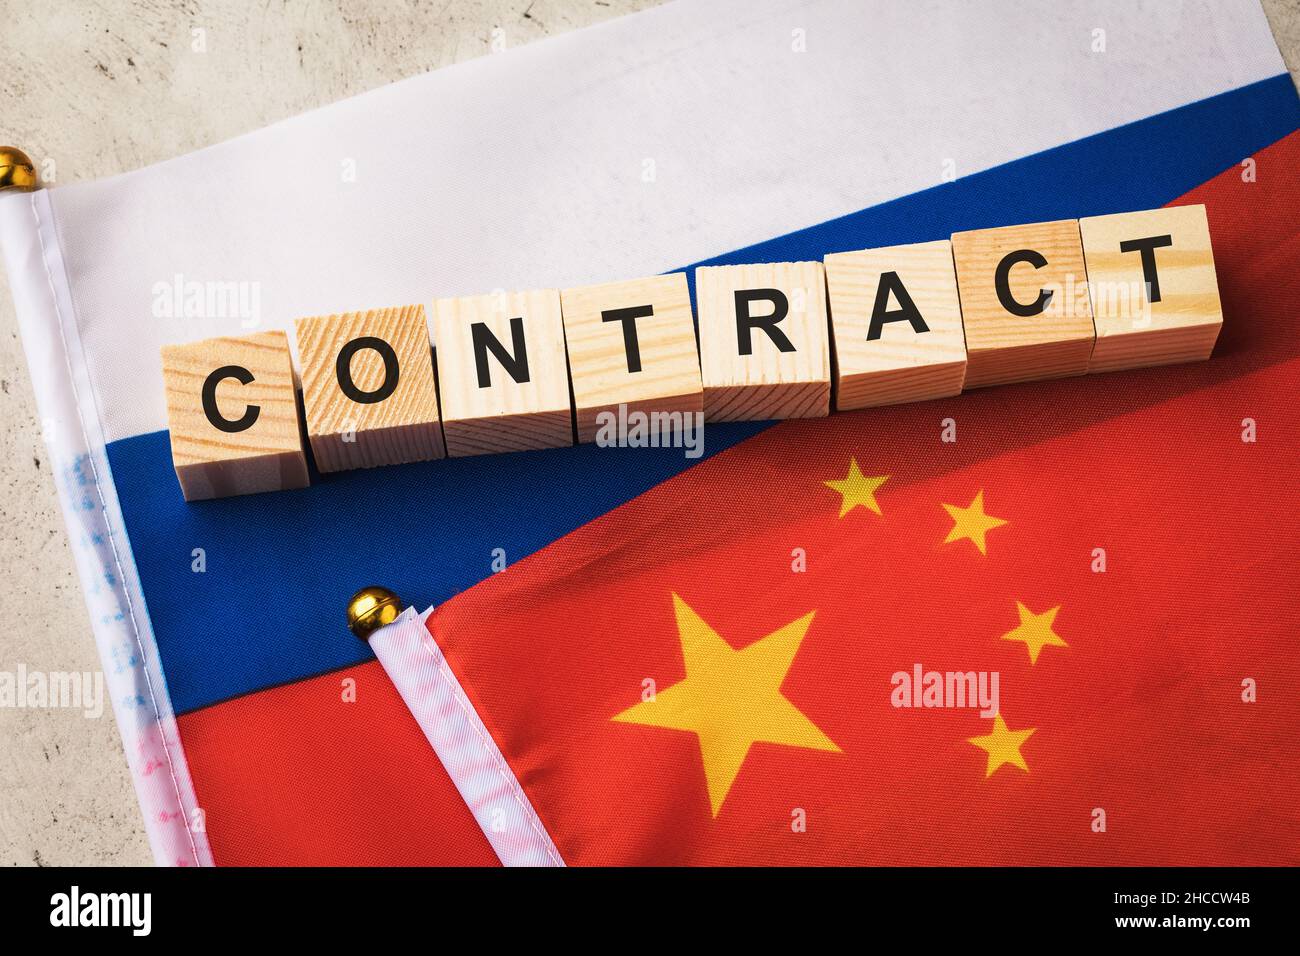 Wooden cubes with text surrounded by flags of Russia and China, a concept on the theme of relations between countries Stock Photo